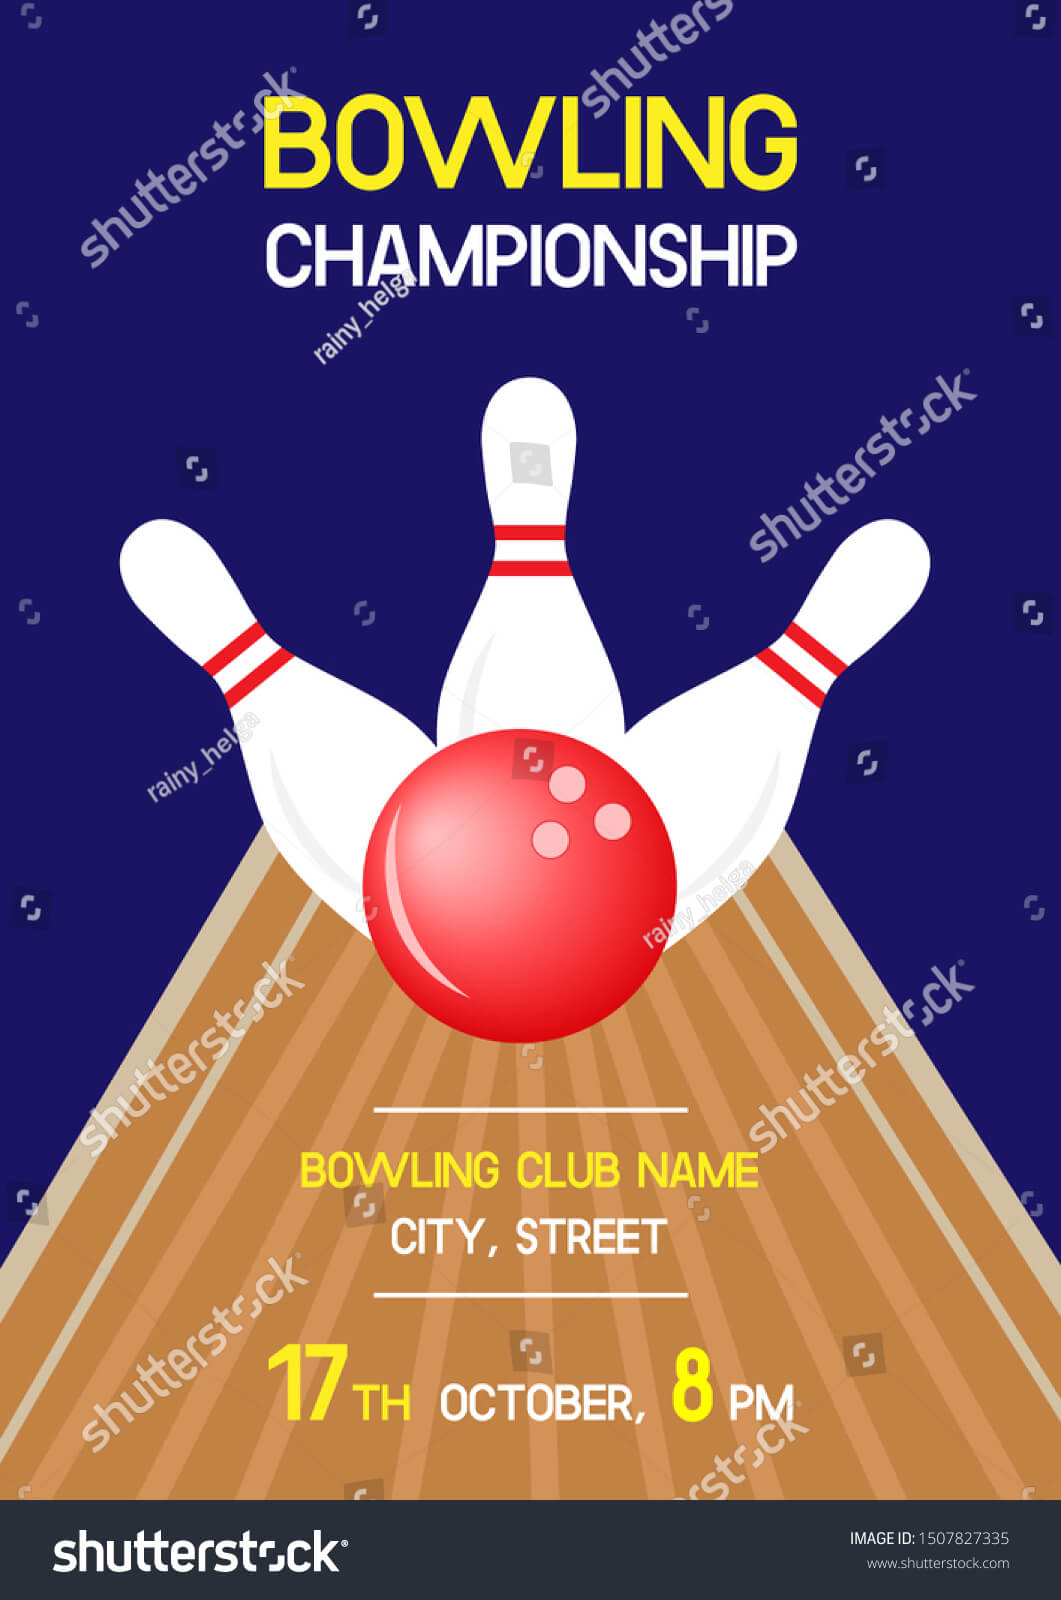 Bowling Championship Invitation Flyer Template Sample Stock For Bowling Flyers Templates Free